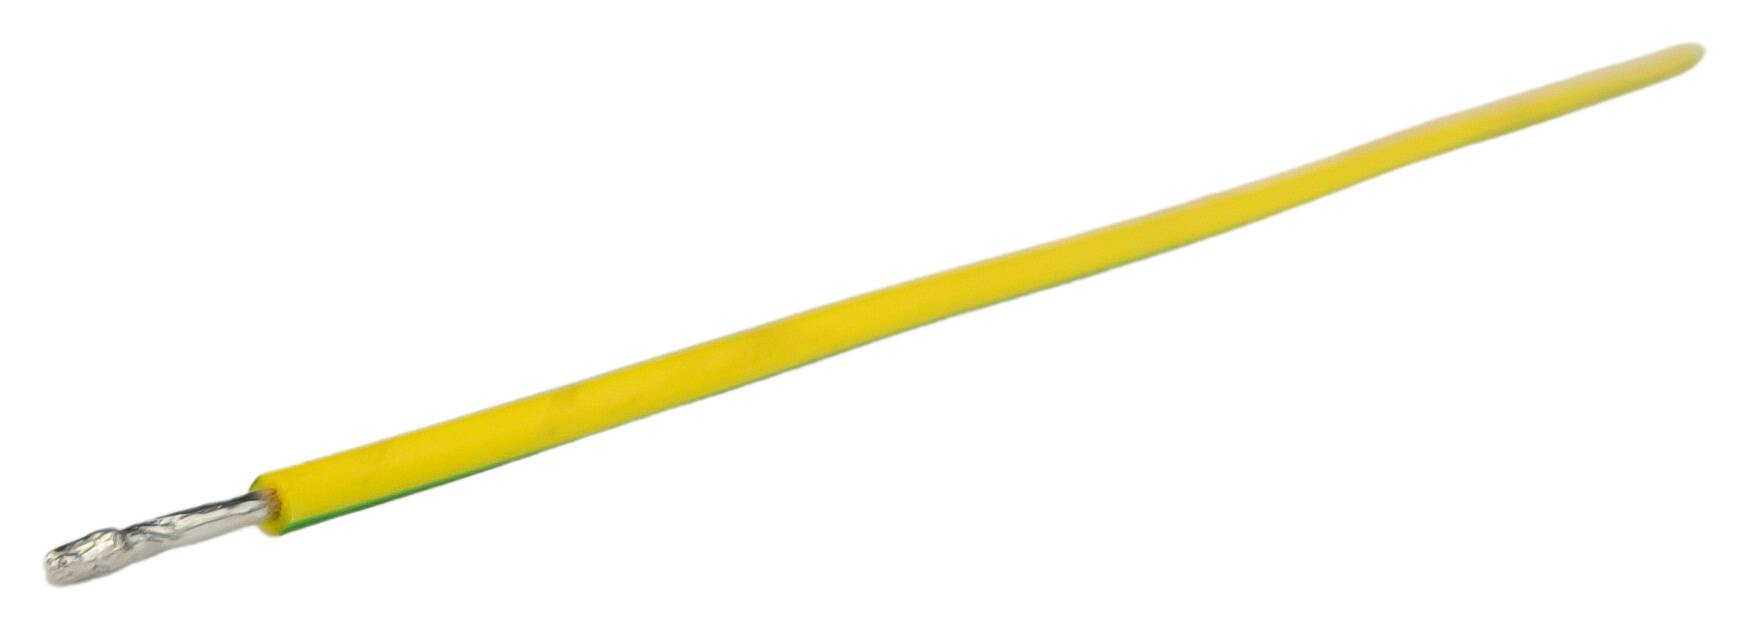 stranded wire cut 1x1,50 halogen-free 600 mm 11/11 twisted+tinned green-yellow